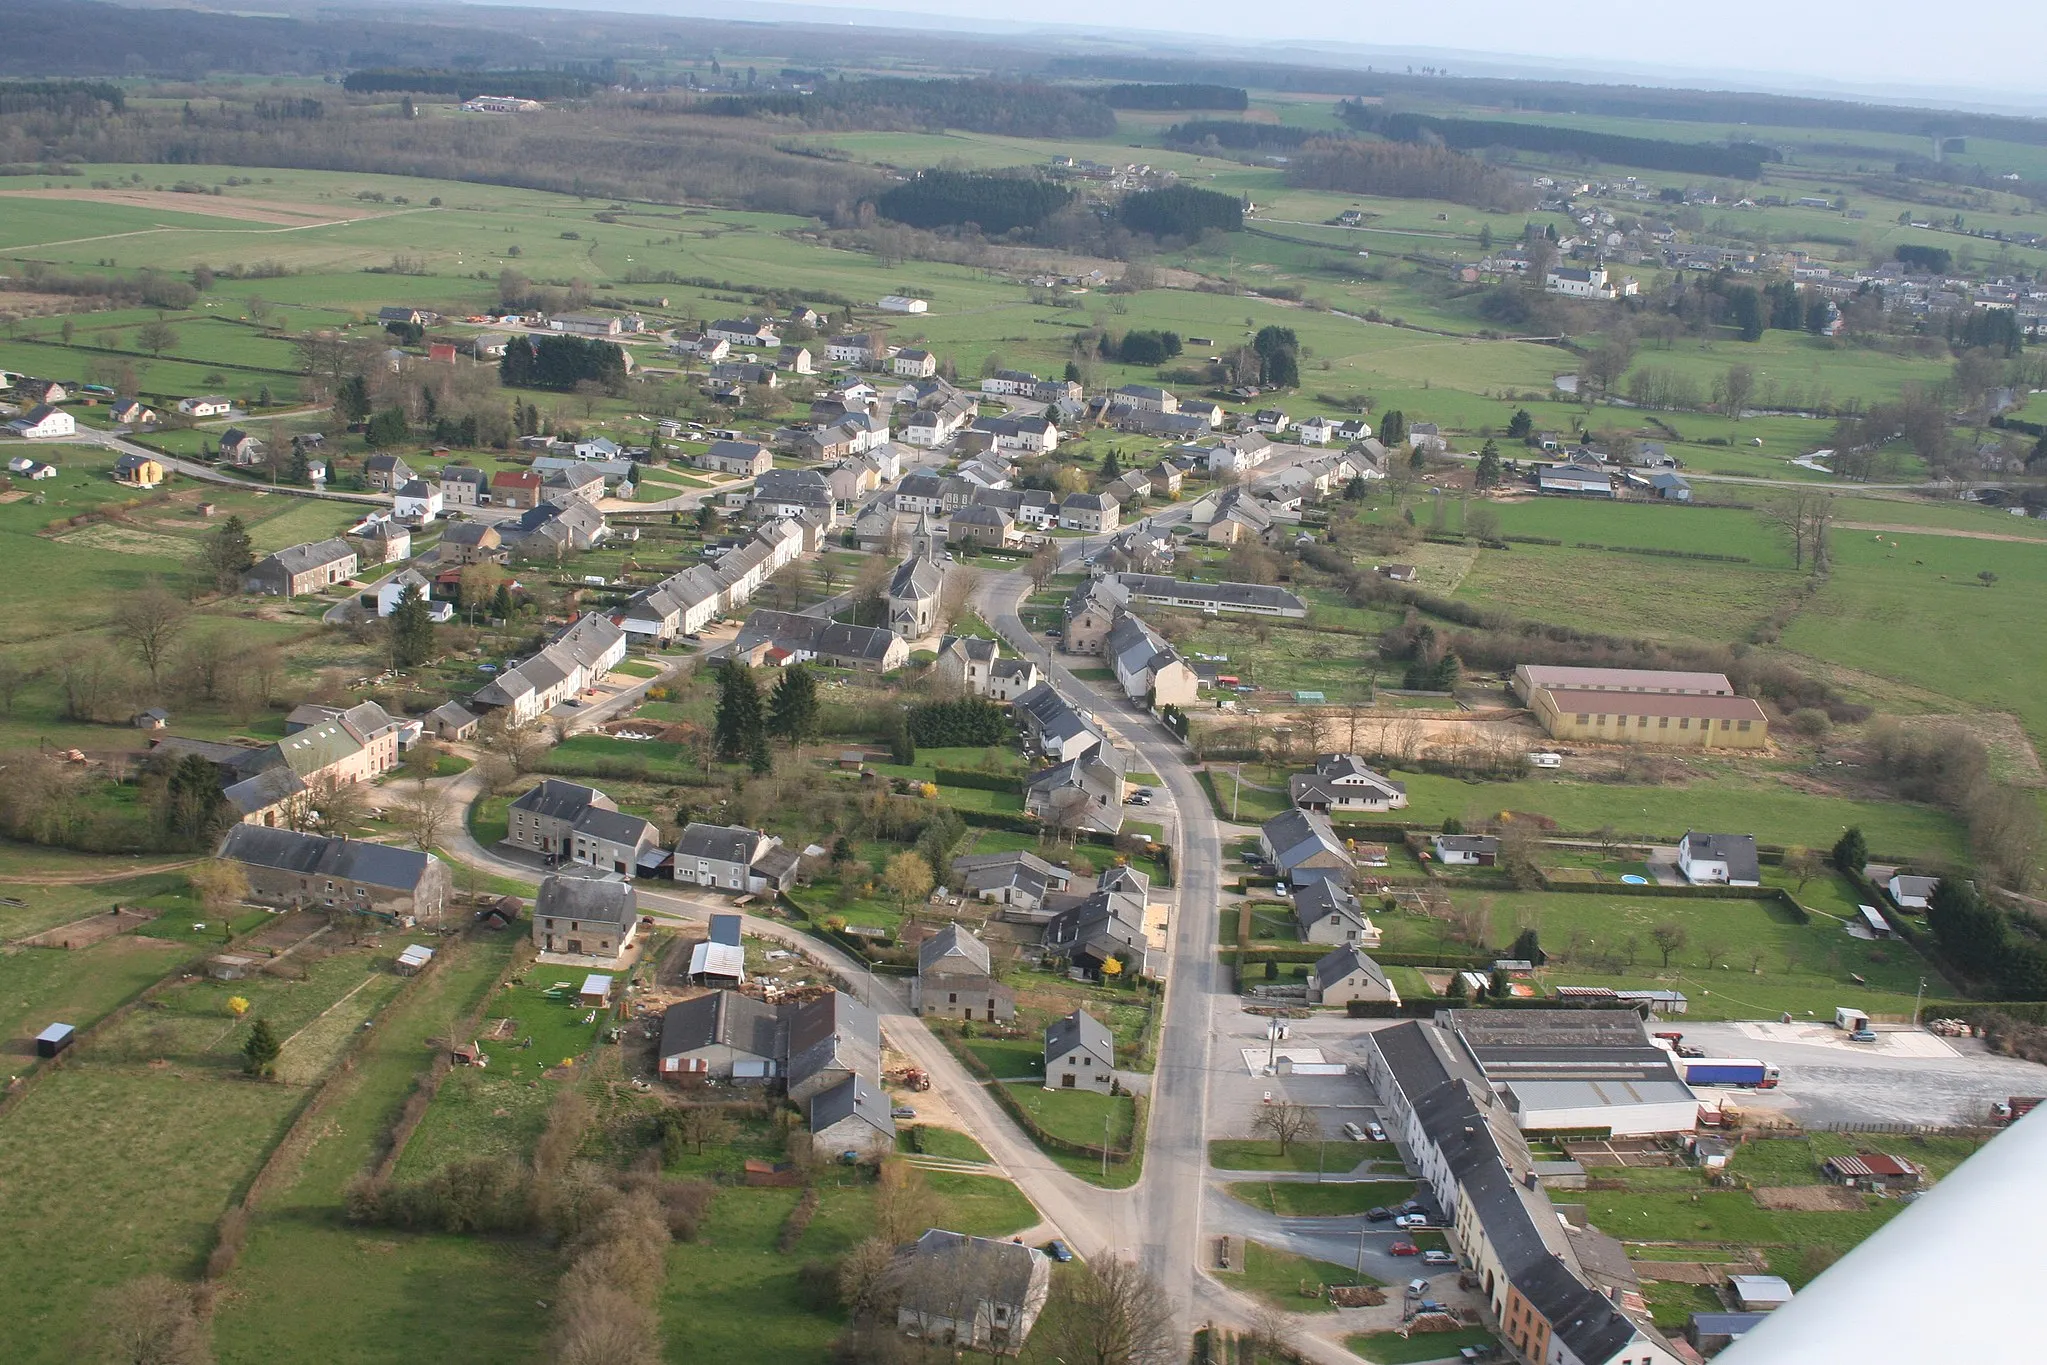 Photo showing: An air sight of the small village of Les Bulles in the very south of Belgium.